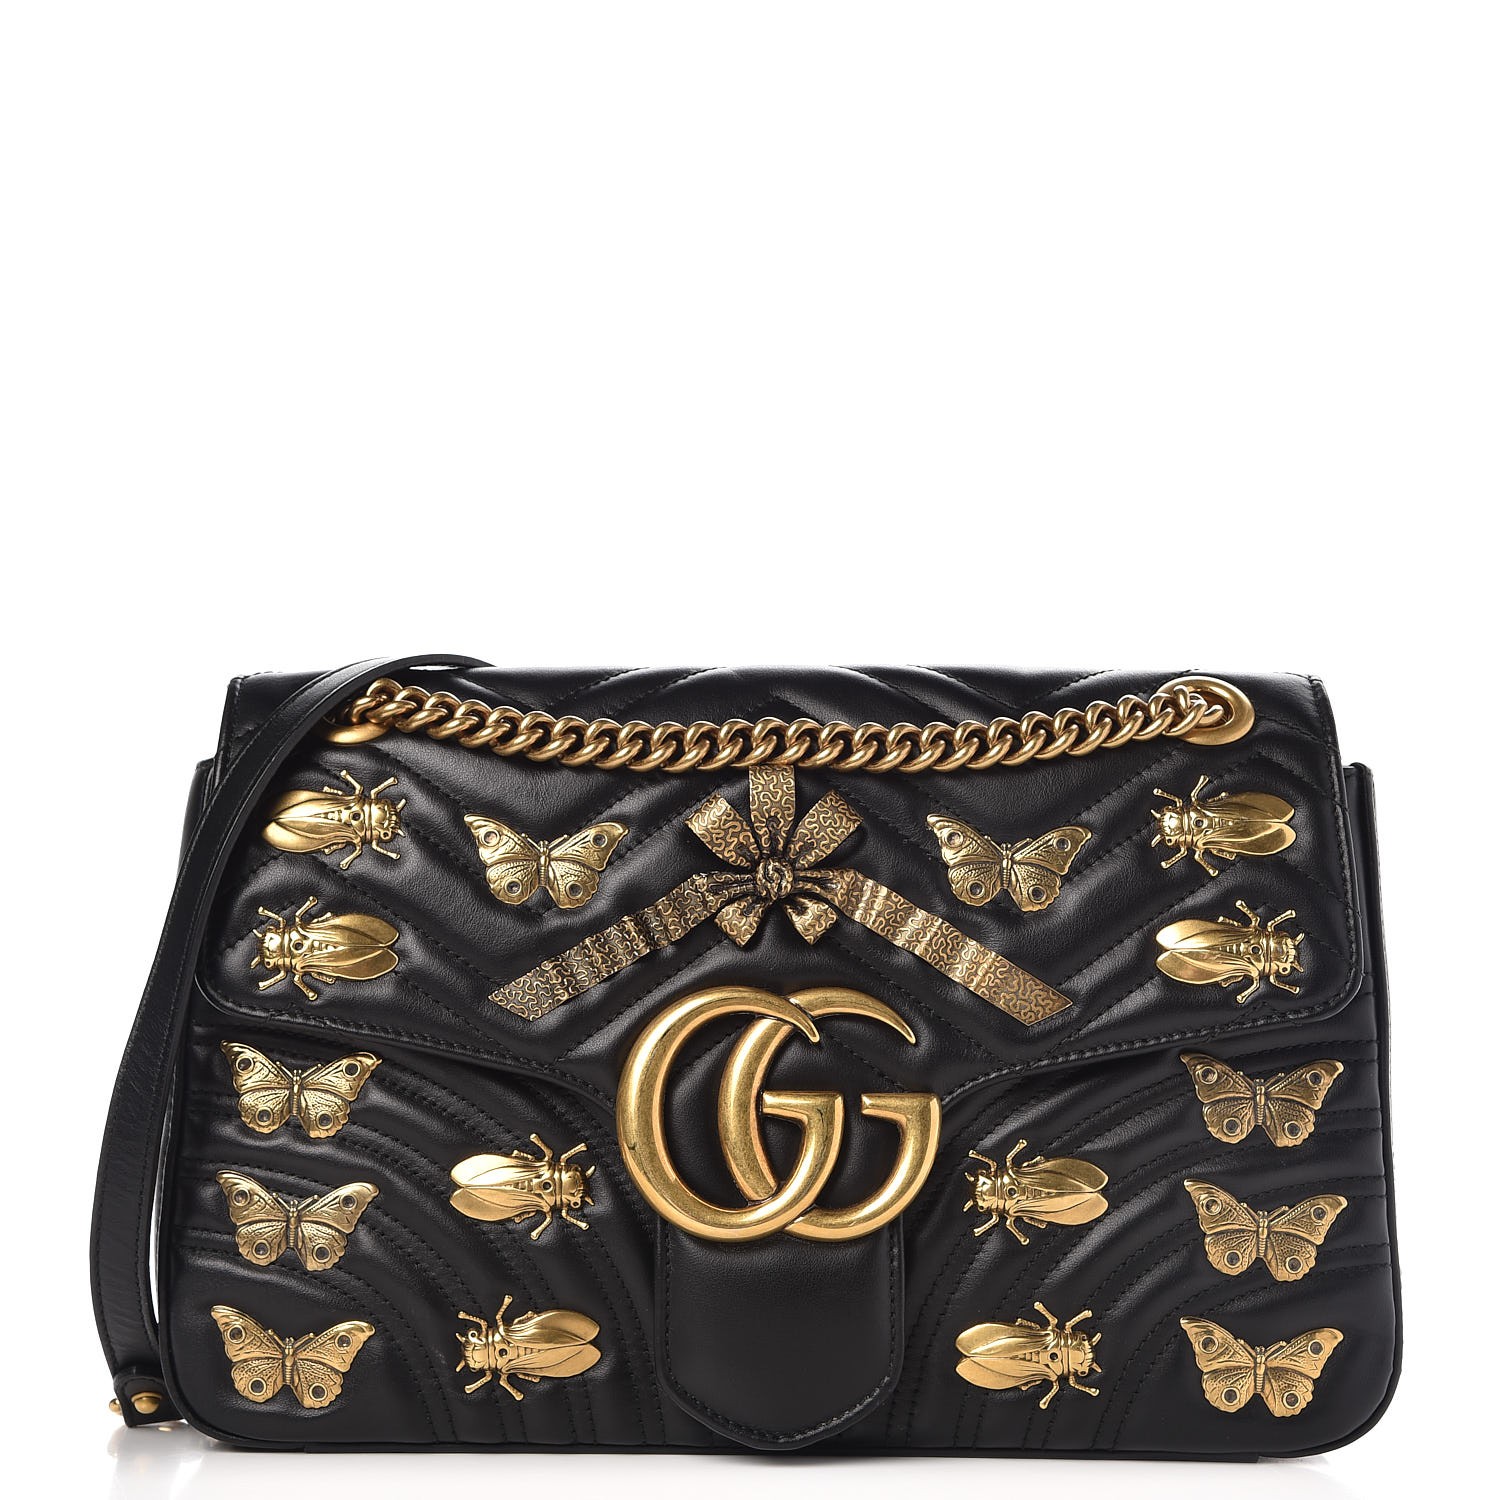 gucci marmont insect bag,OFF 76%,nalan 